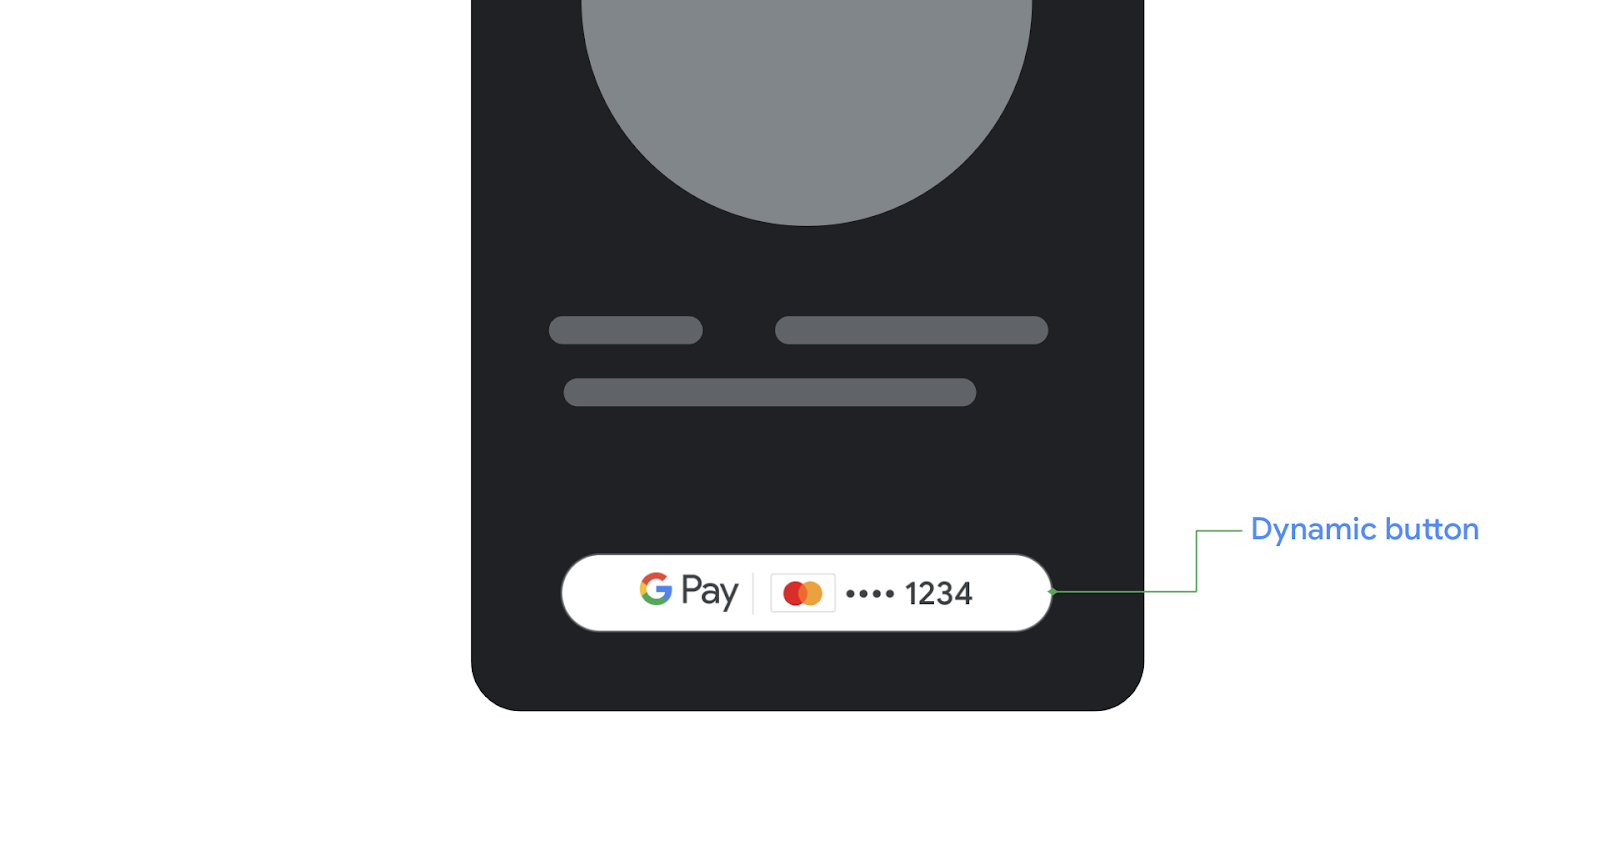 image showing an example of how the dynamic version of the new Google Pay button view will look on Android.